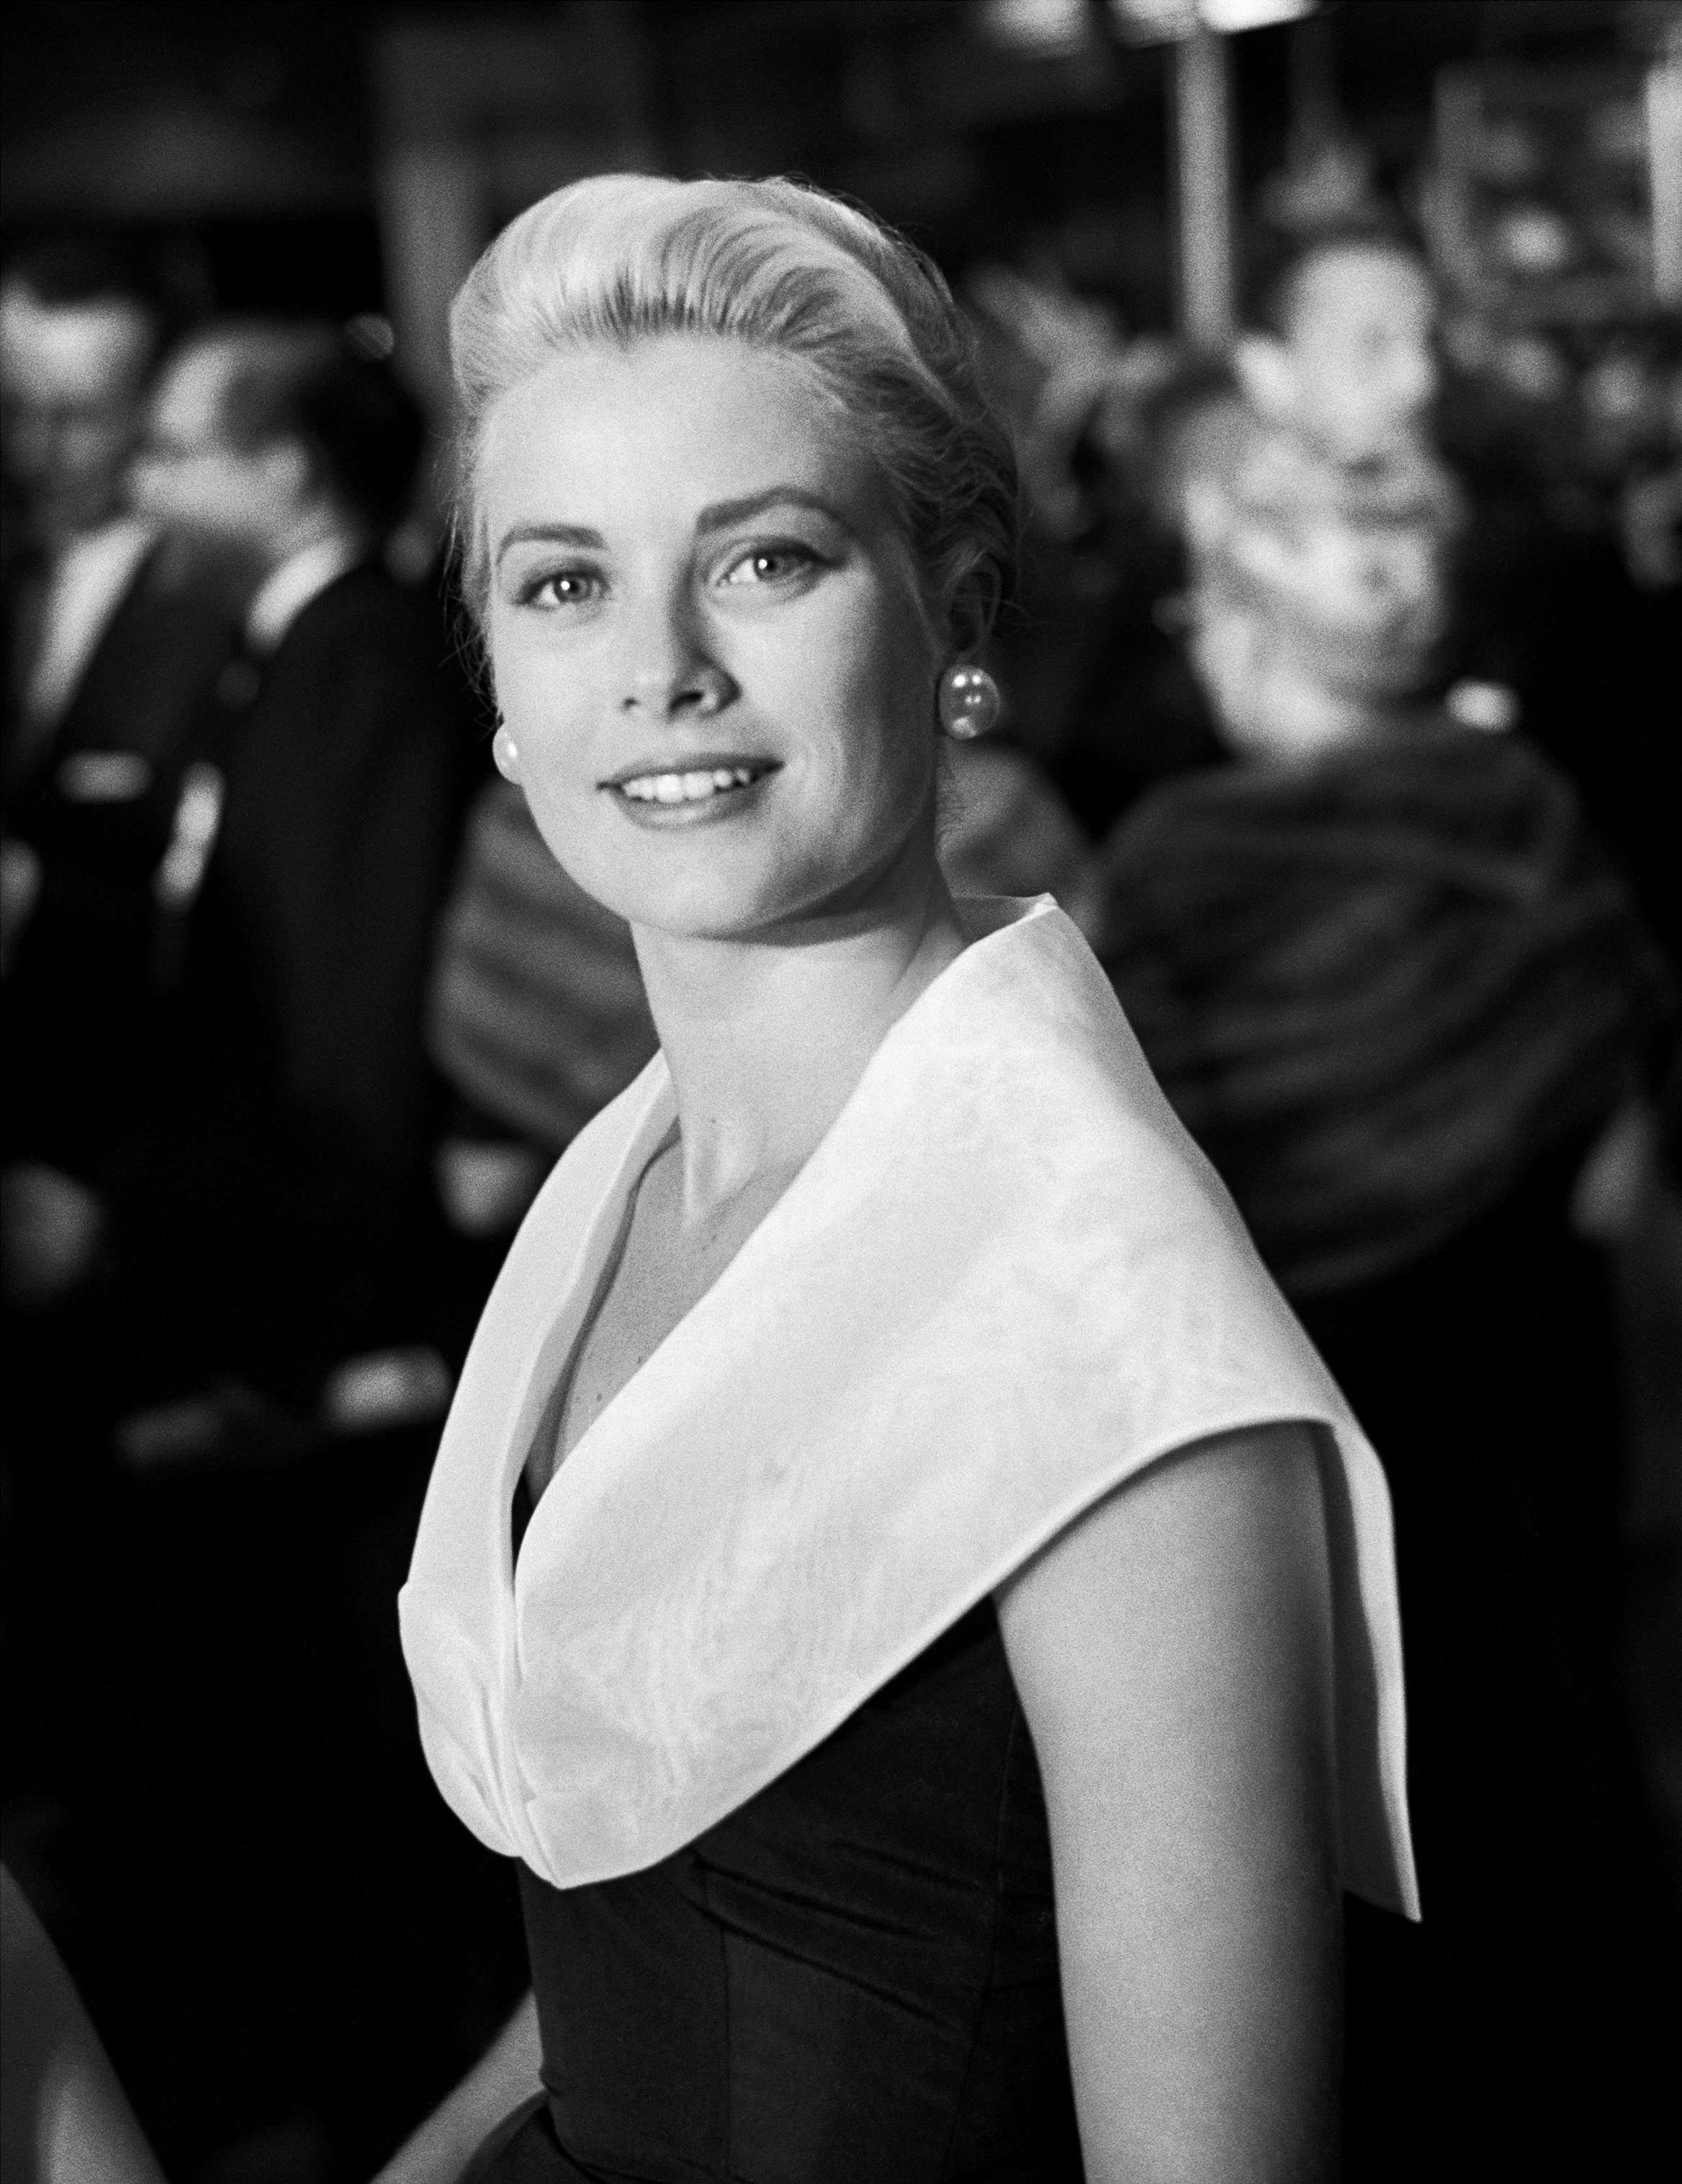 Grace Kelly at the premiere of the movie "Rear Window" in 1954 | Source: Getty Images